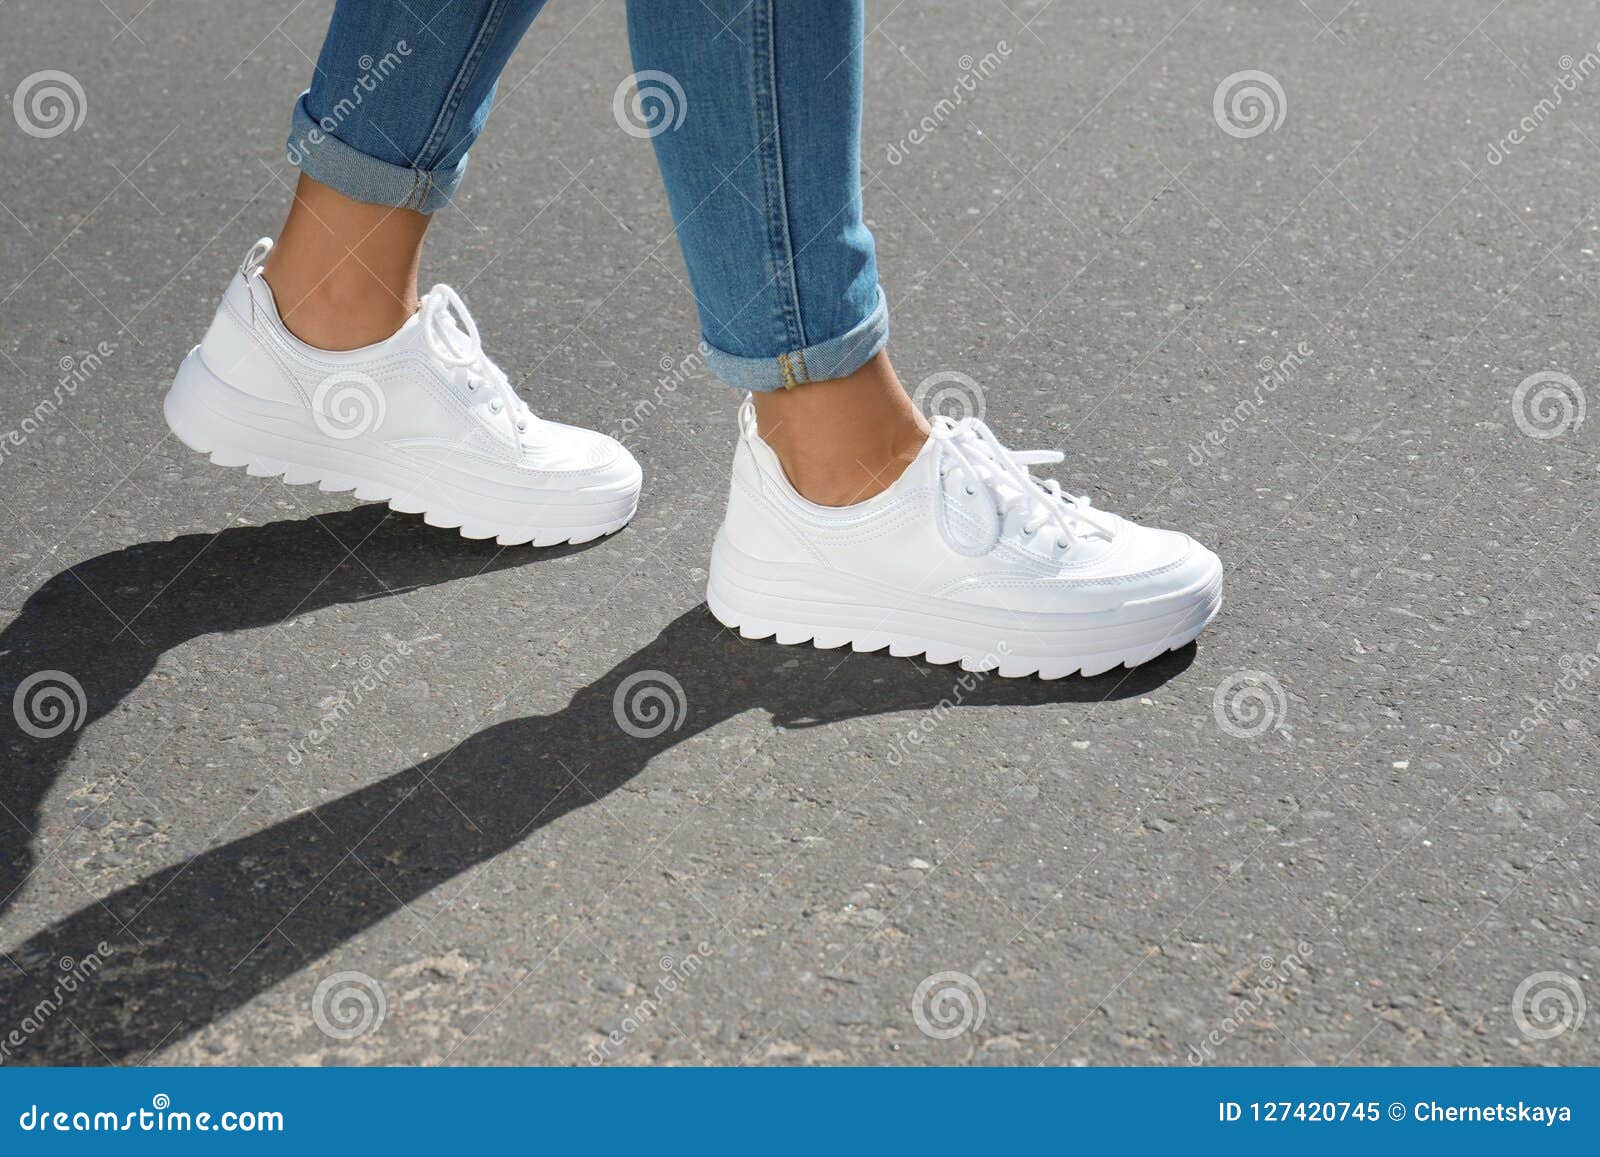 Woman in Stylish Sneakers Walking Outdoors Stock Image - Image of legs ...